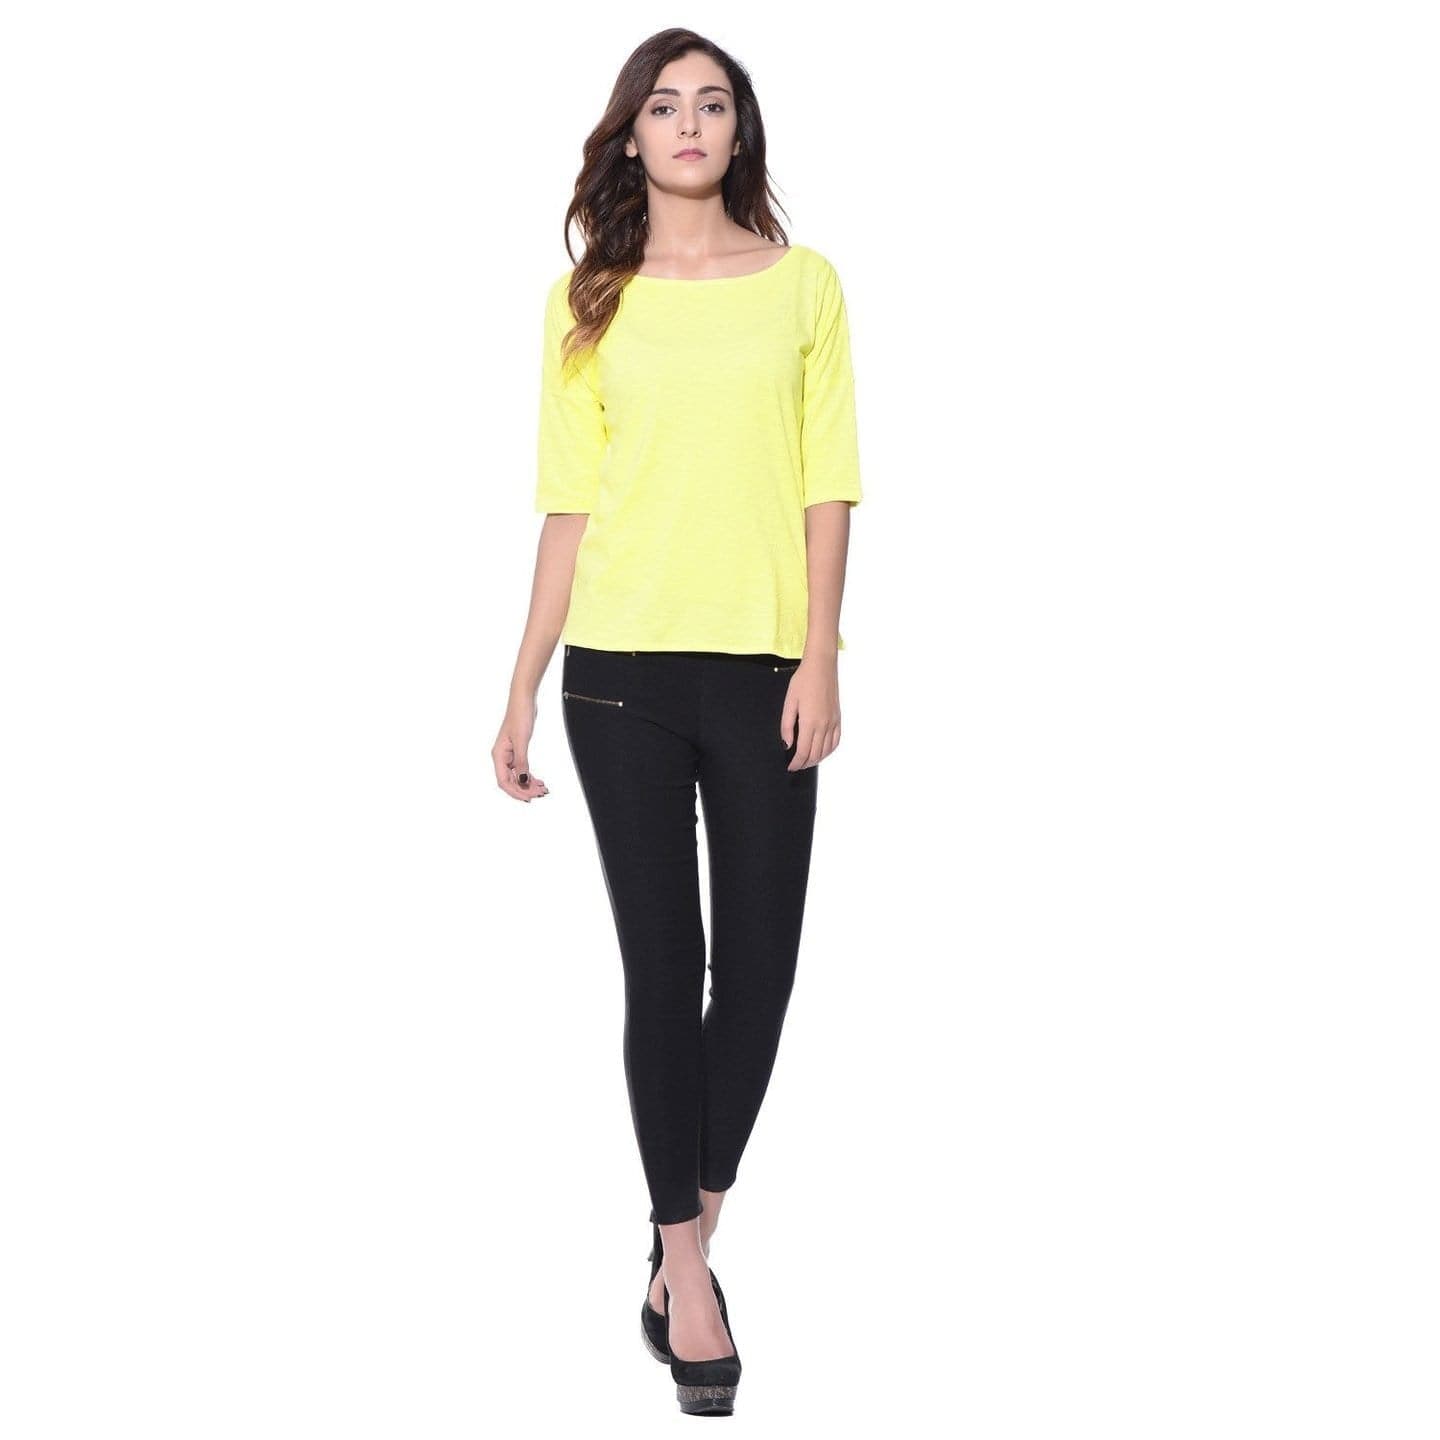 Solid Yellow Cotton T-shirt - Uptownie